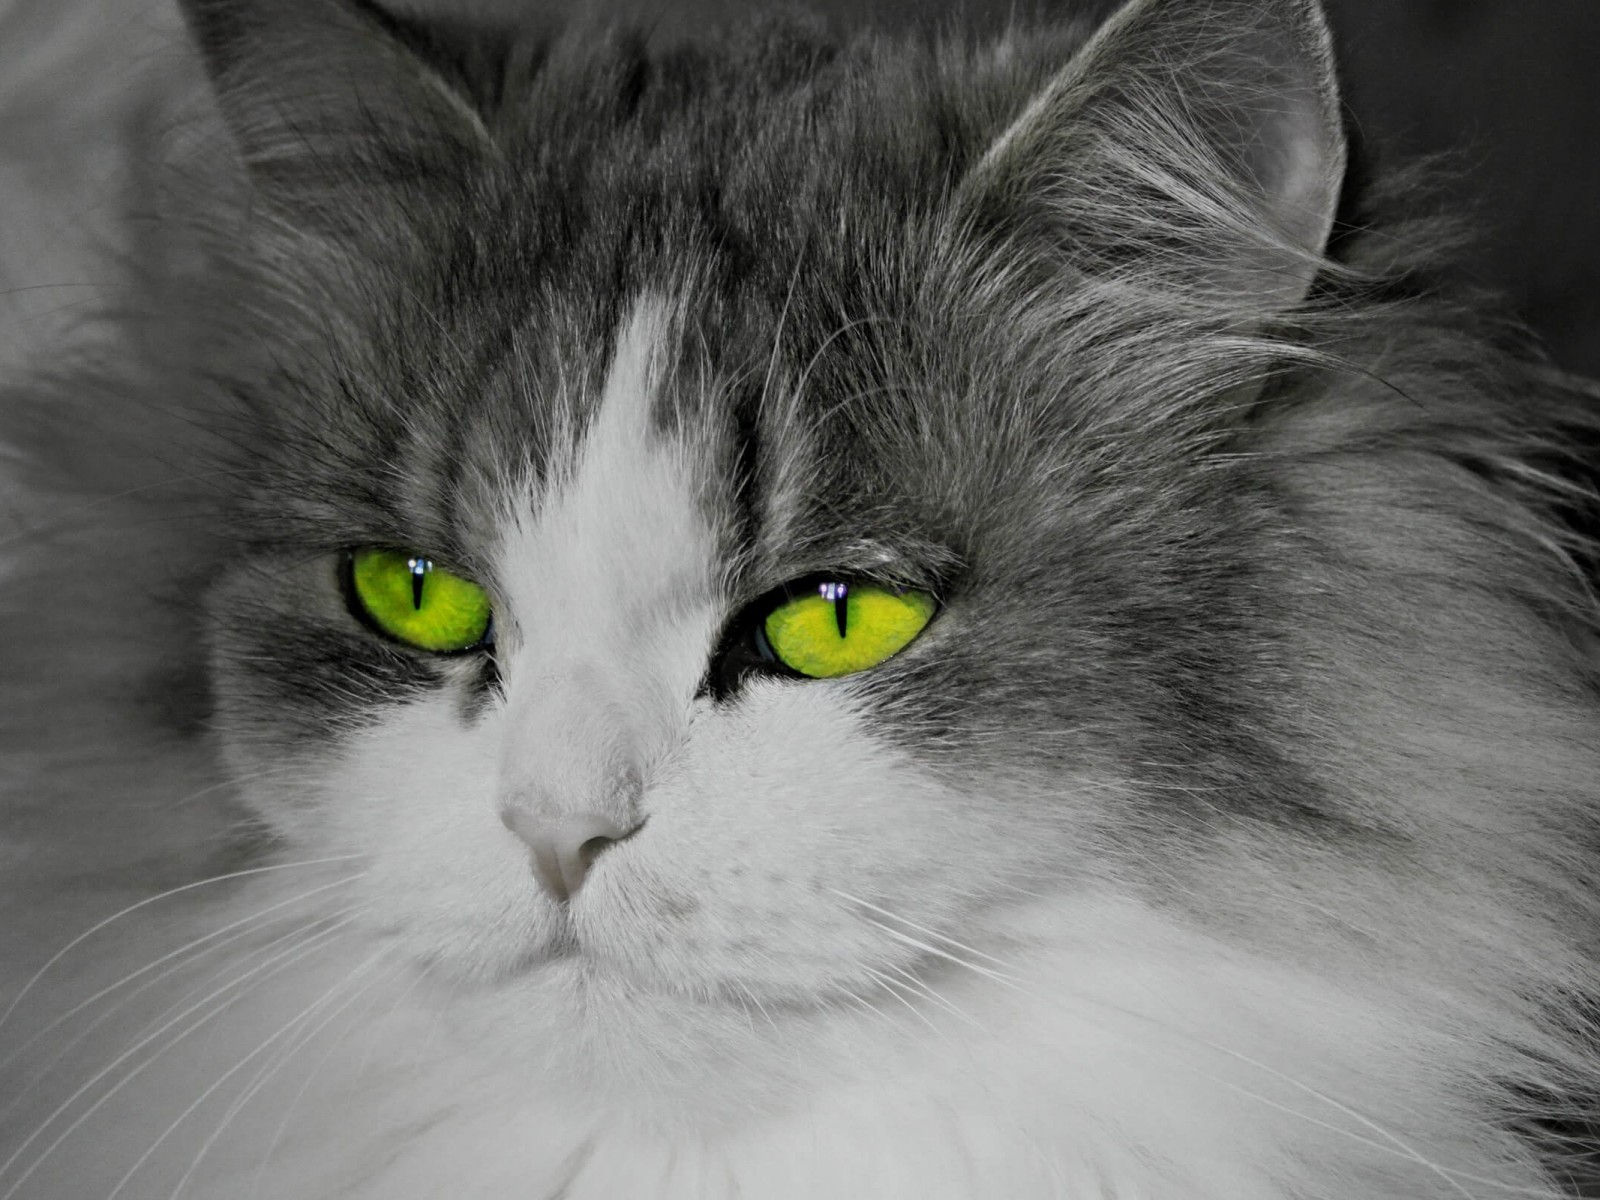 Cat With Stunningly Green Eyes Wallpaper for Desktop 1600x1200